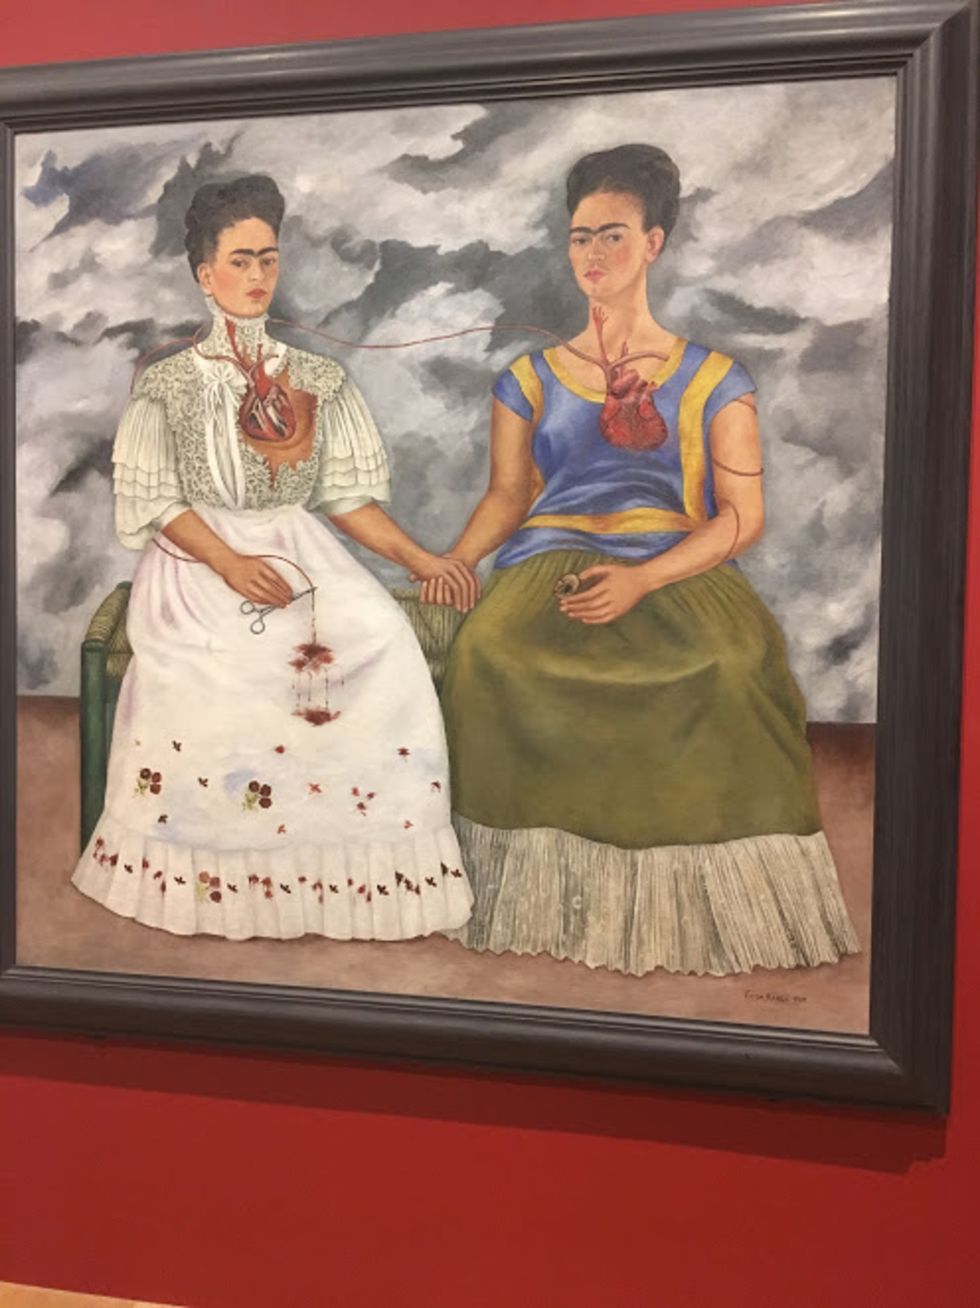 20 Quotes To Remind You How Much of a Bad Ass Frida Khalo Was